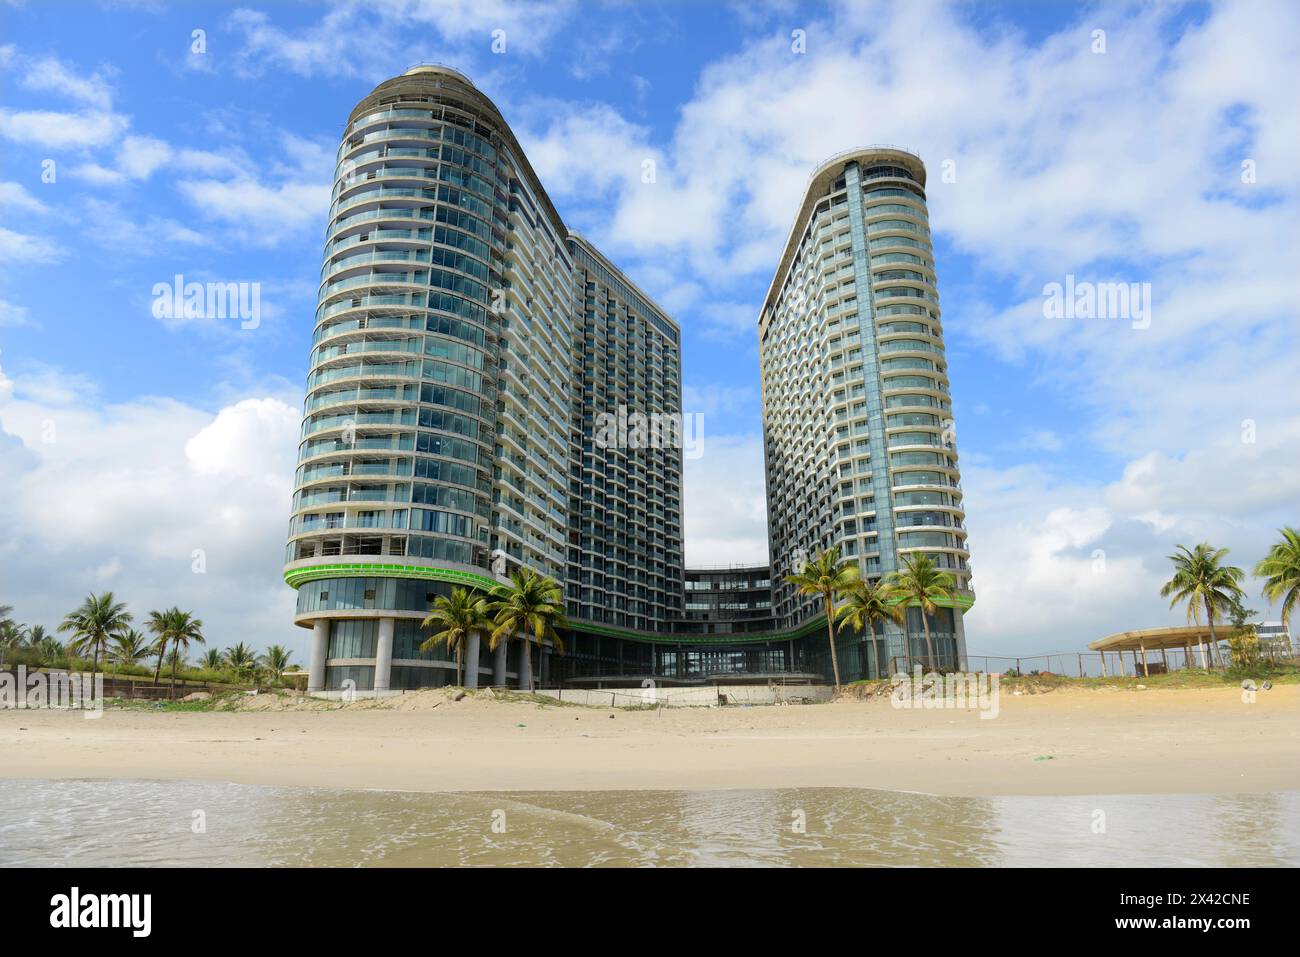 A new giant hotel under construction along the beautiful long white sand beach along the changing waterfront skyline in Da Nang, Vietnam. Stock Photo